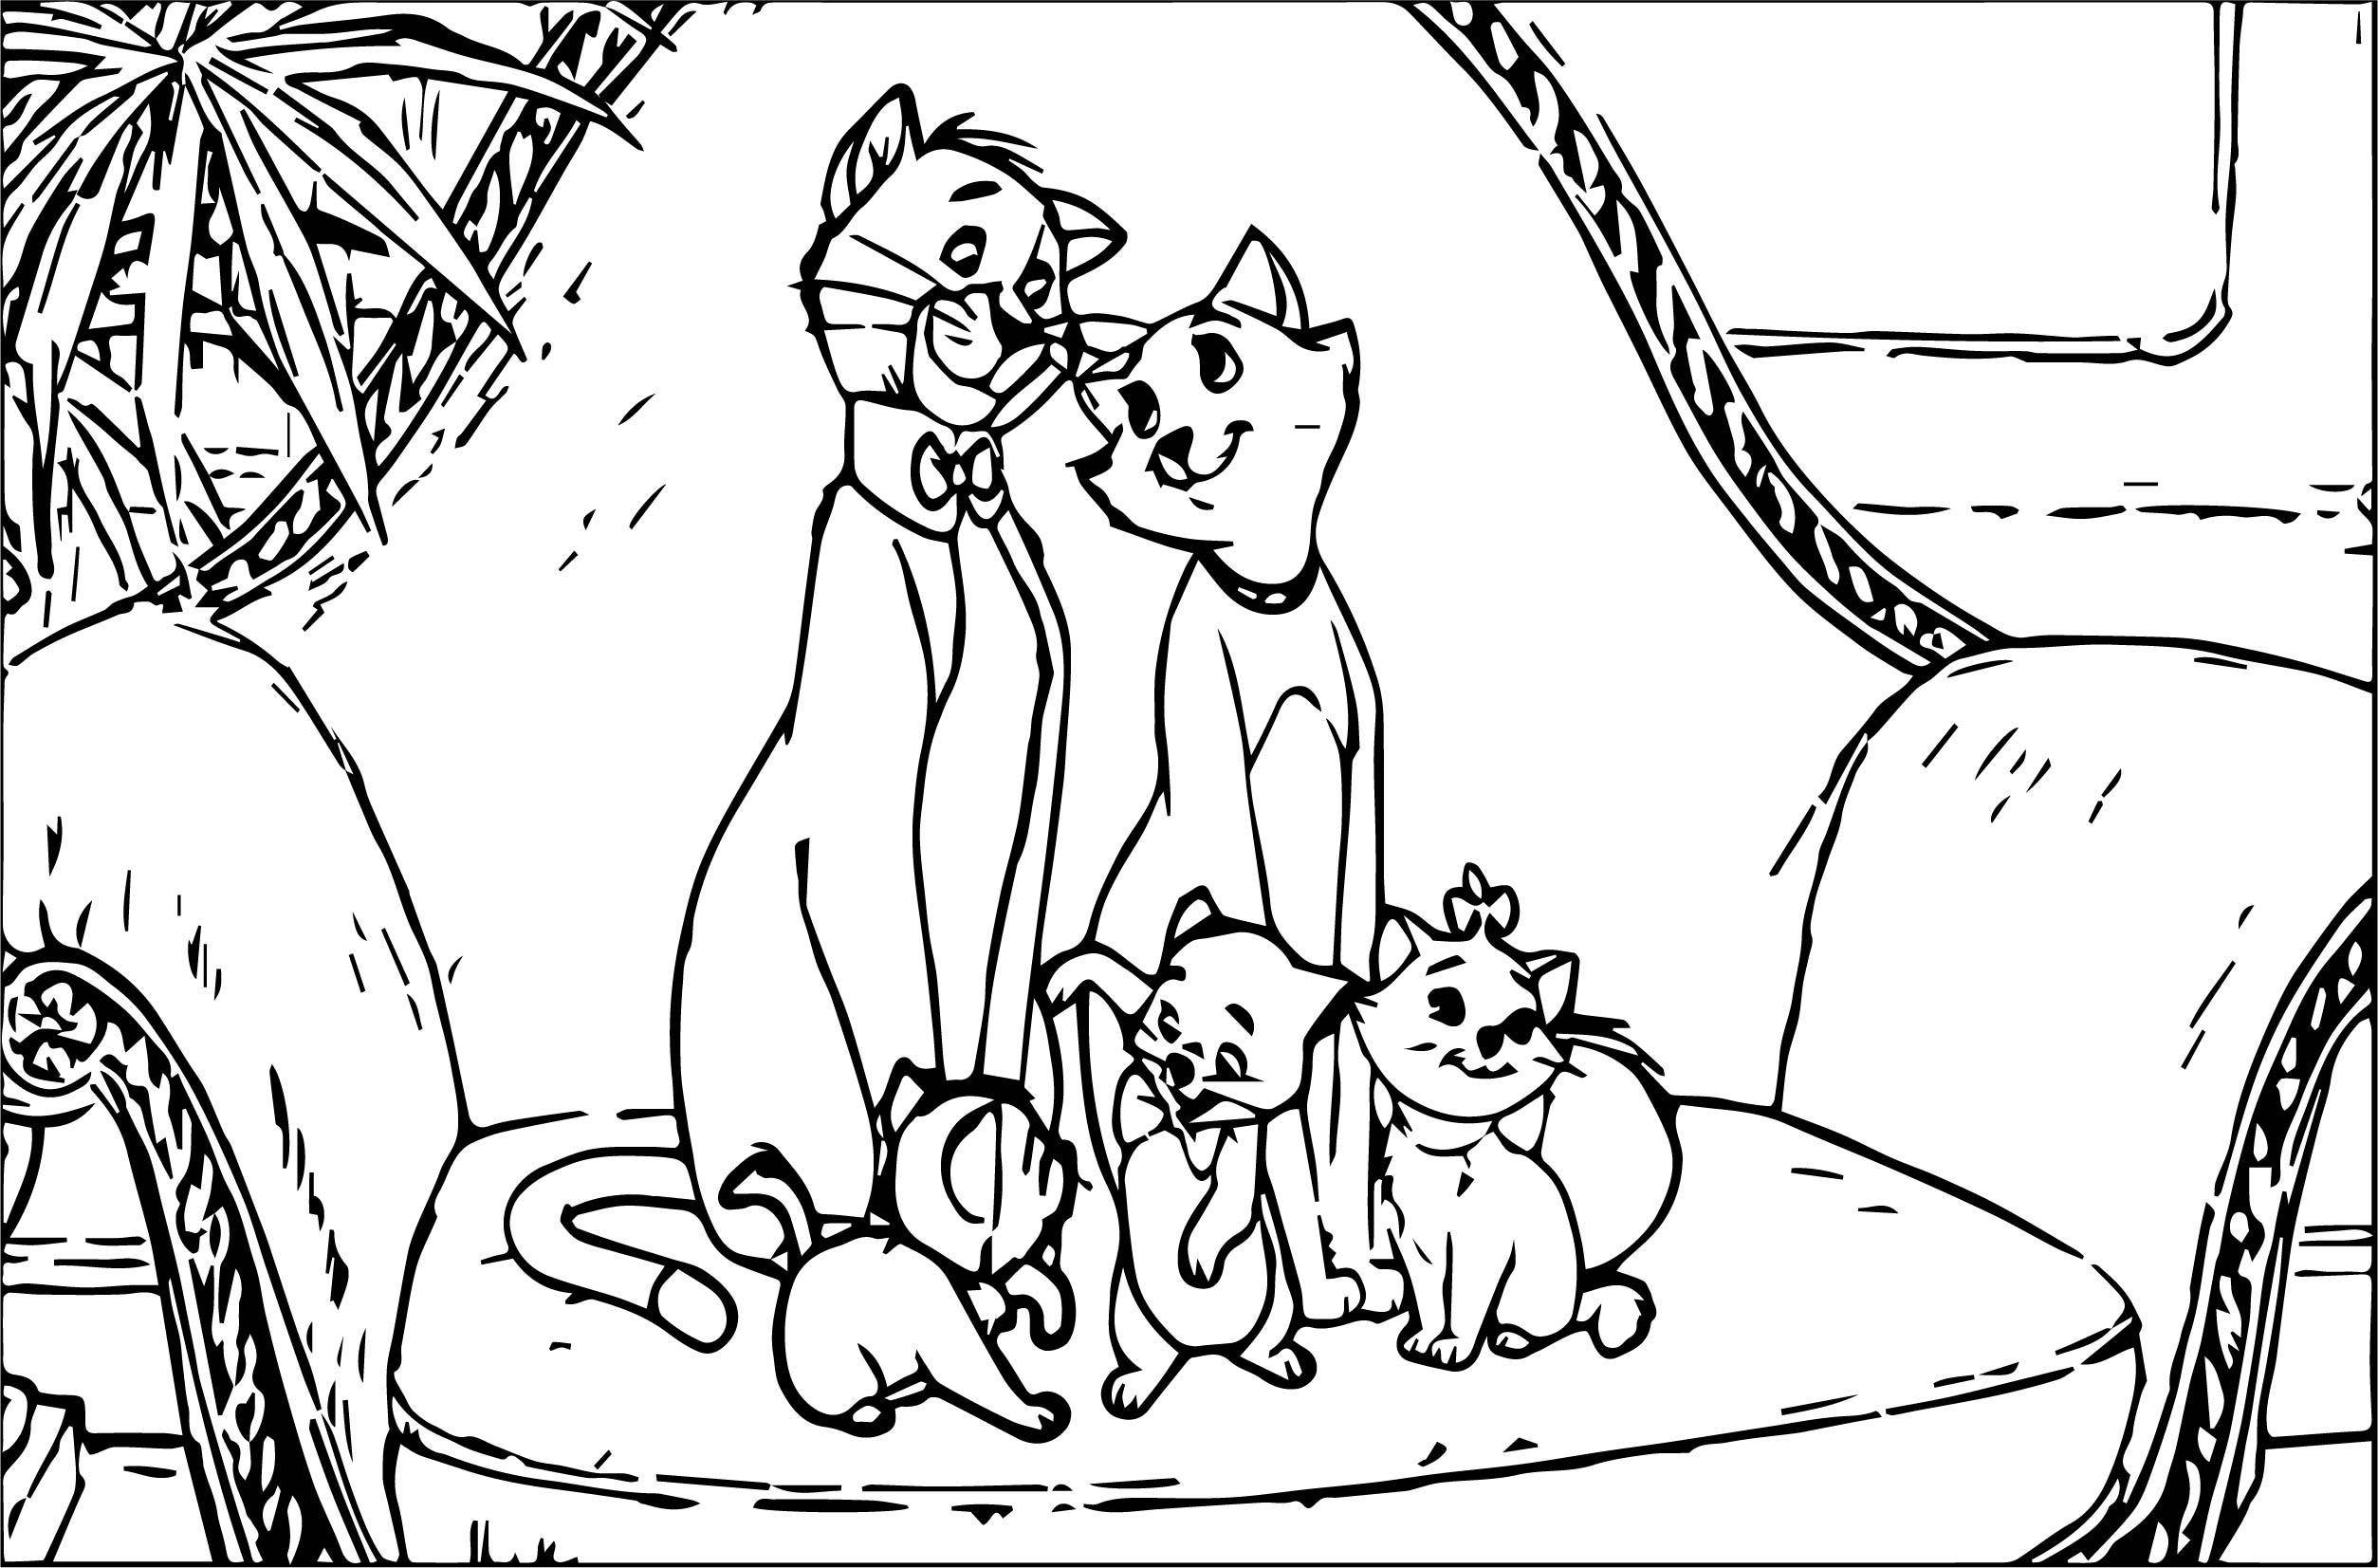 The Aristocats Printable Coloring Pages Disney Sketch Coloring Page